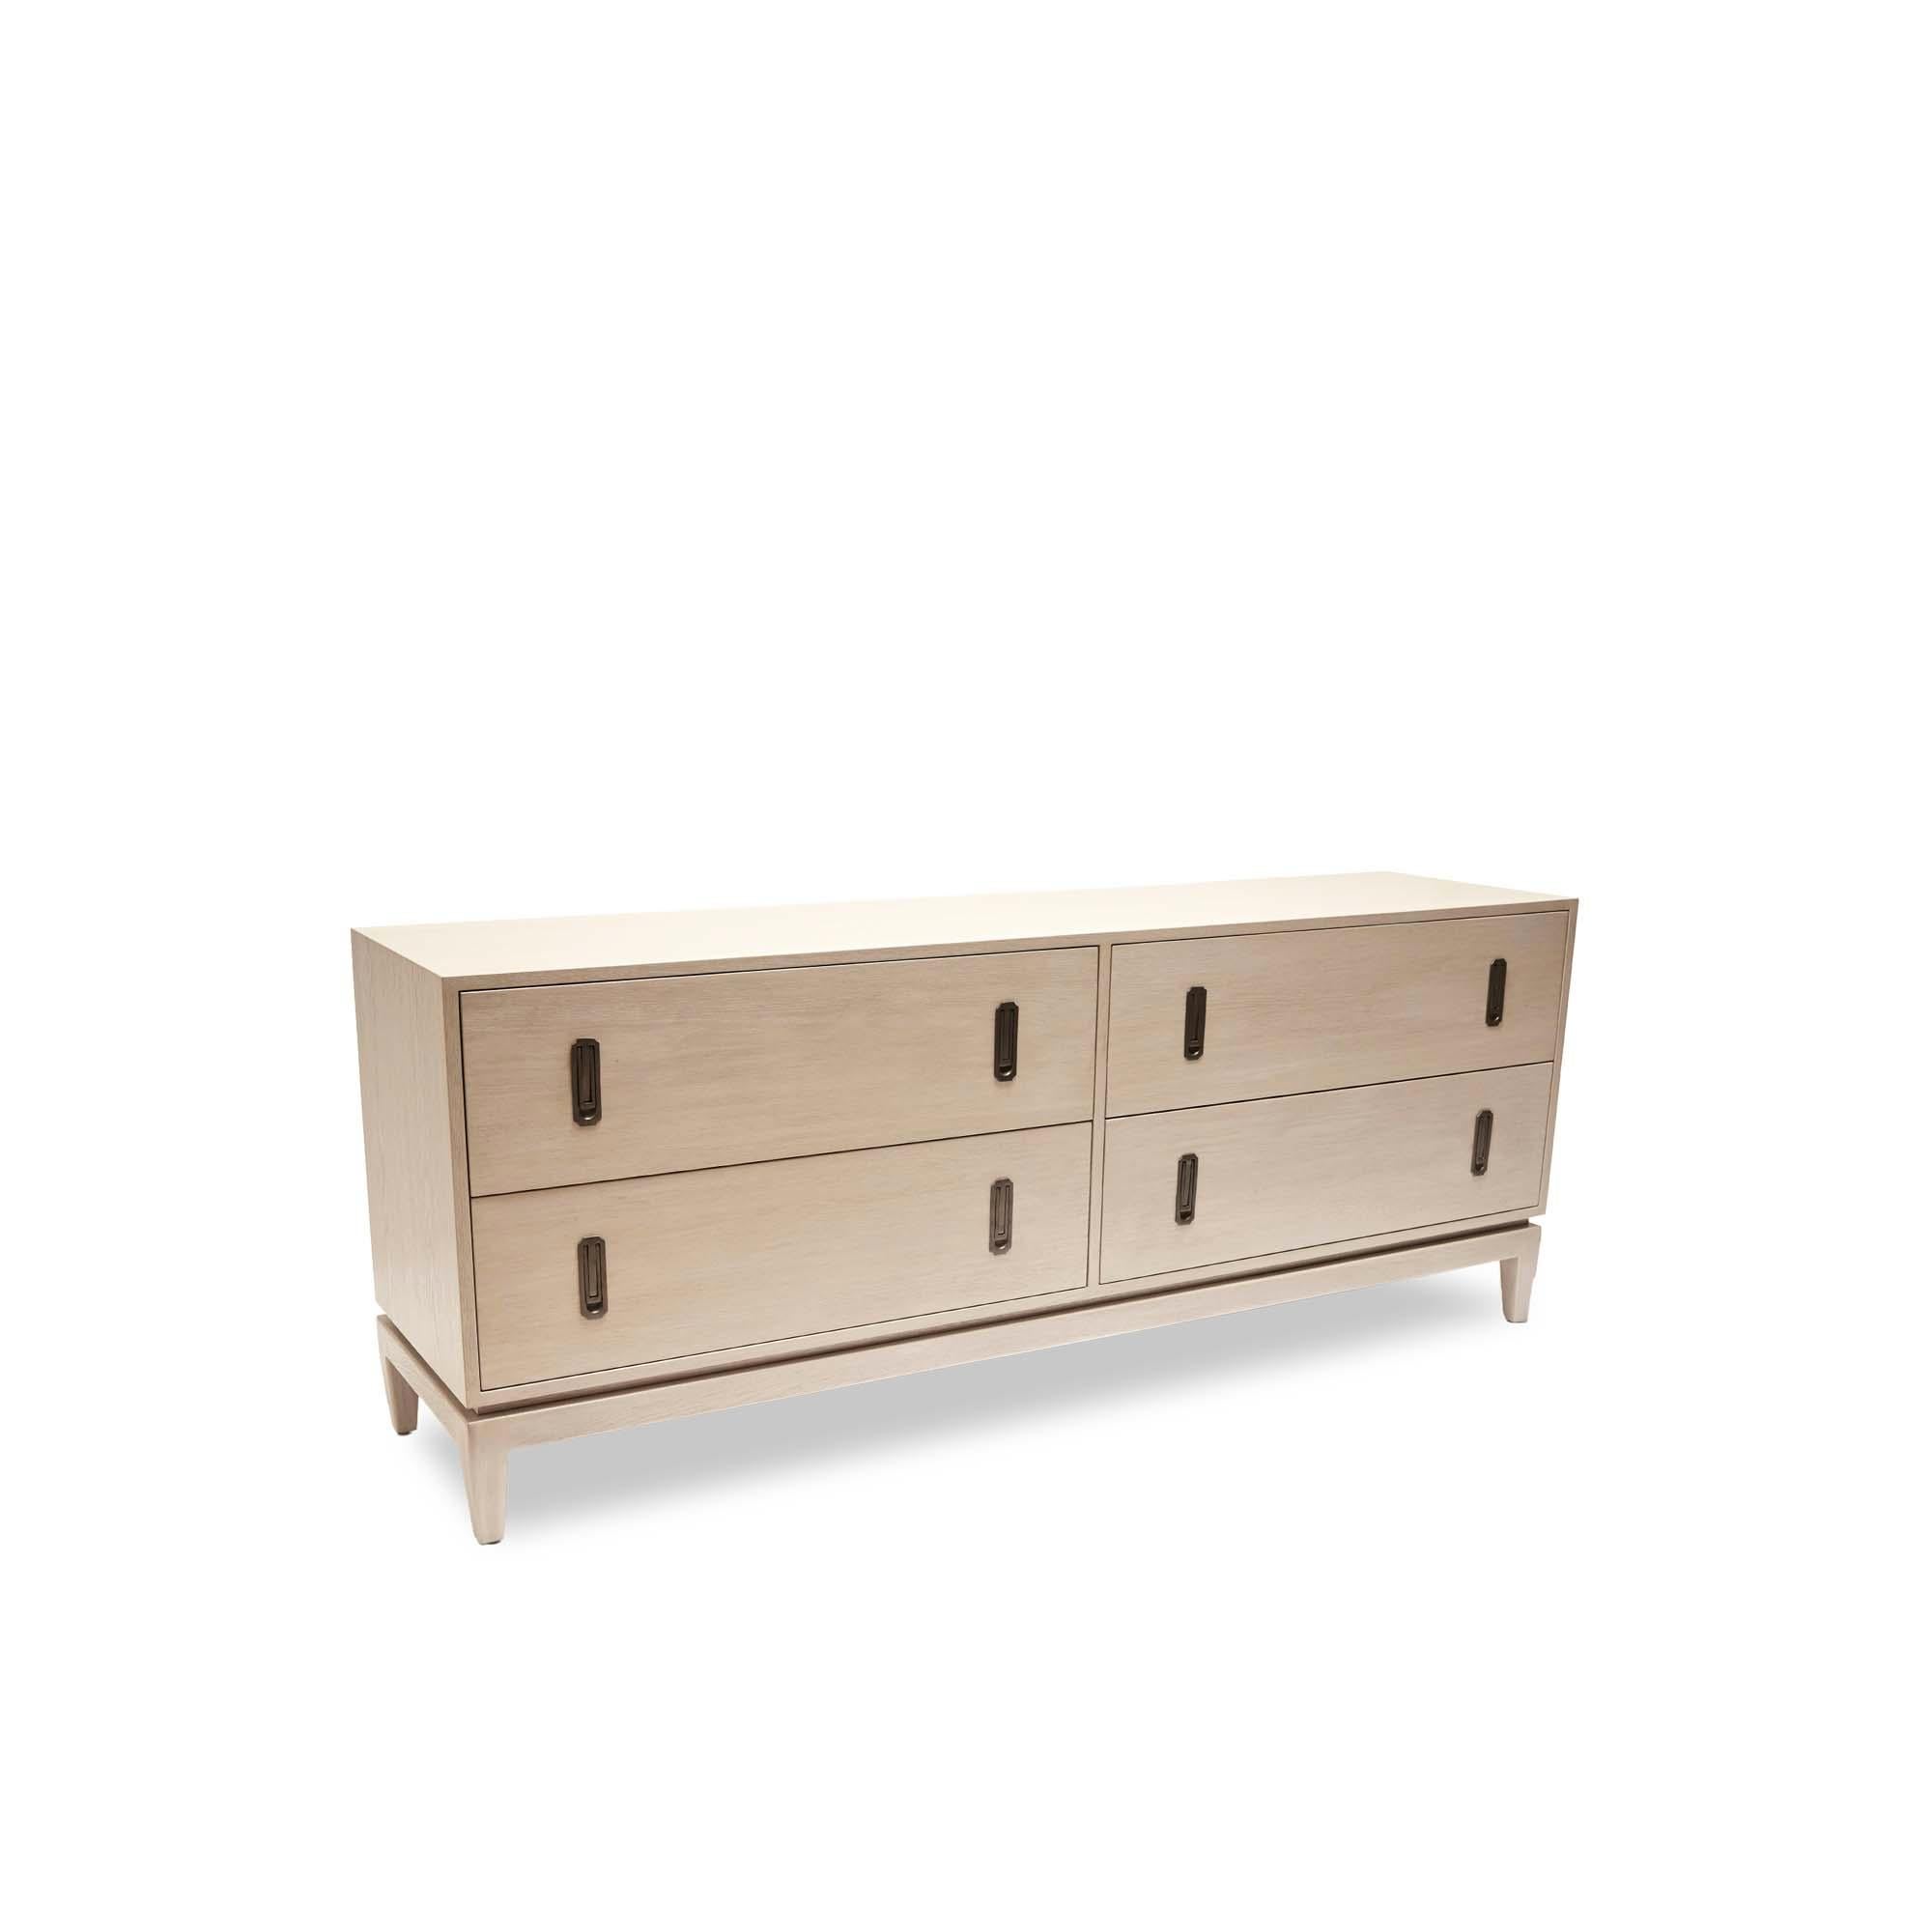 The 4-drawer Arcadia chest features four drawers, cast brass hardware, and a sculptural solid American walnut or white oak base. 

The Lawson-Fenning Collection is designed and handmade in Los Angeles, California. Reach out to discover what options